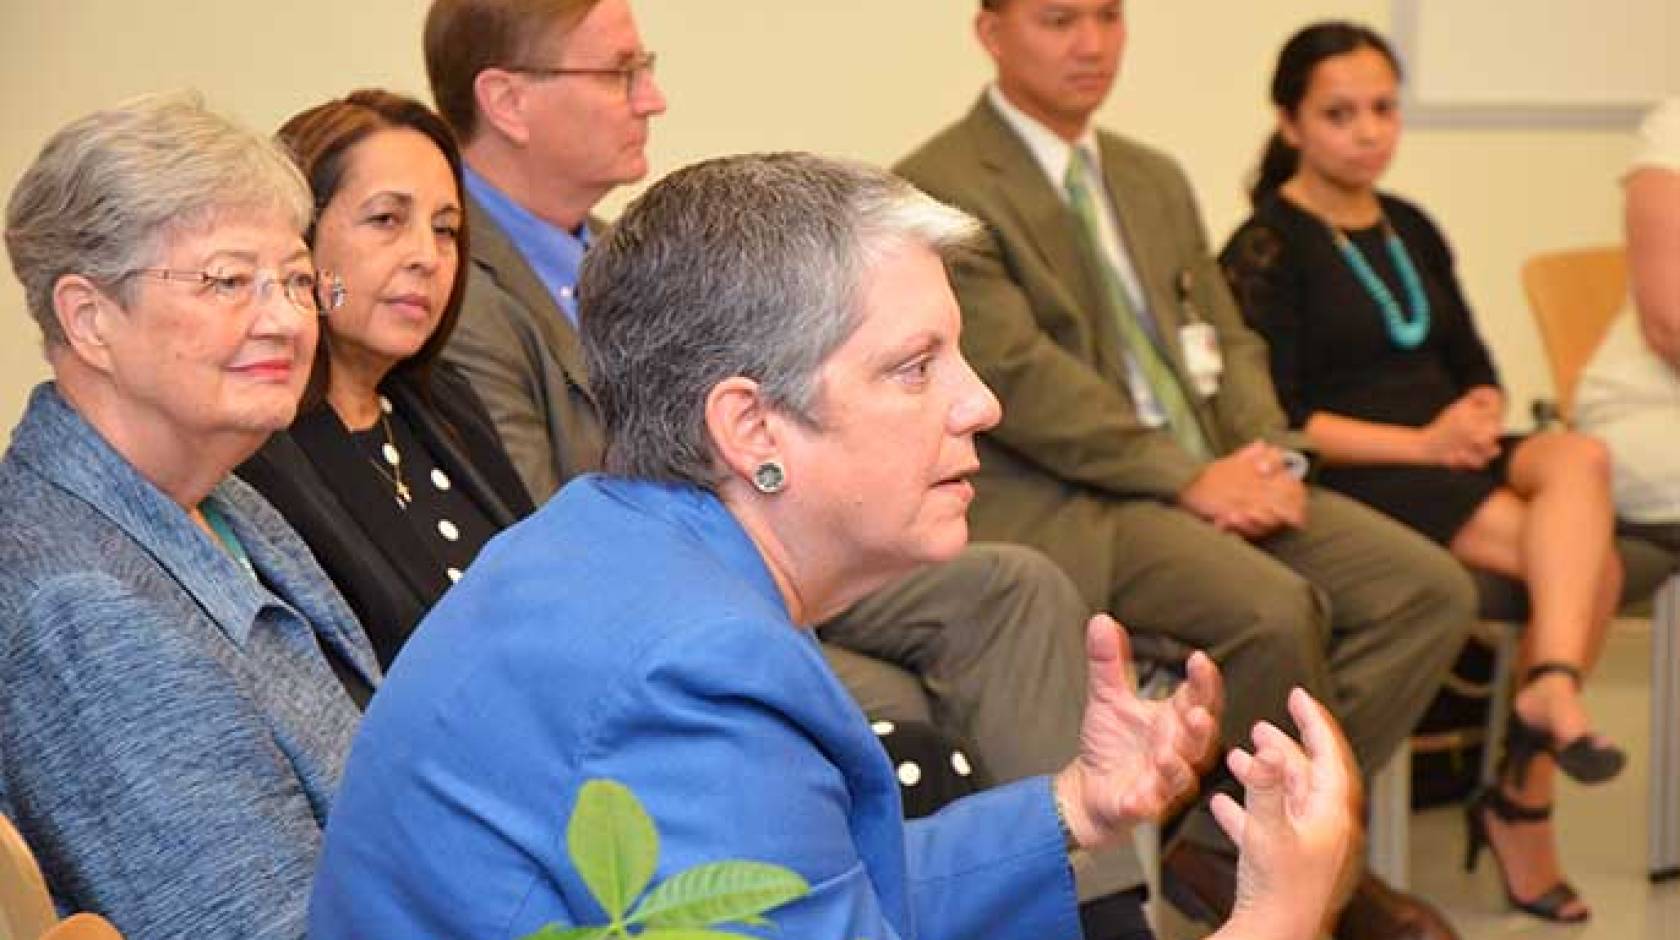 UC President Napolitano at Doctors Academy event